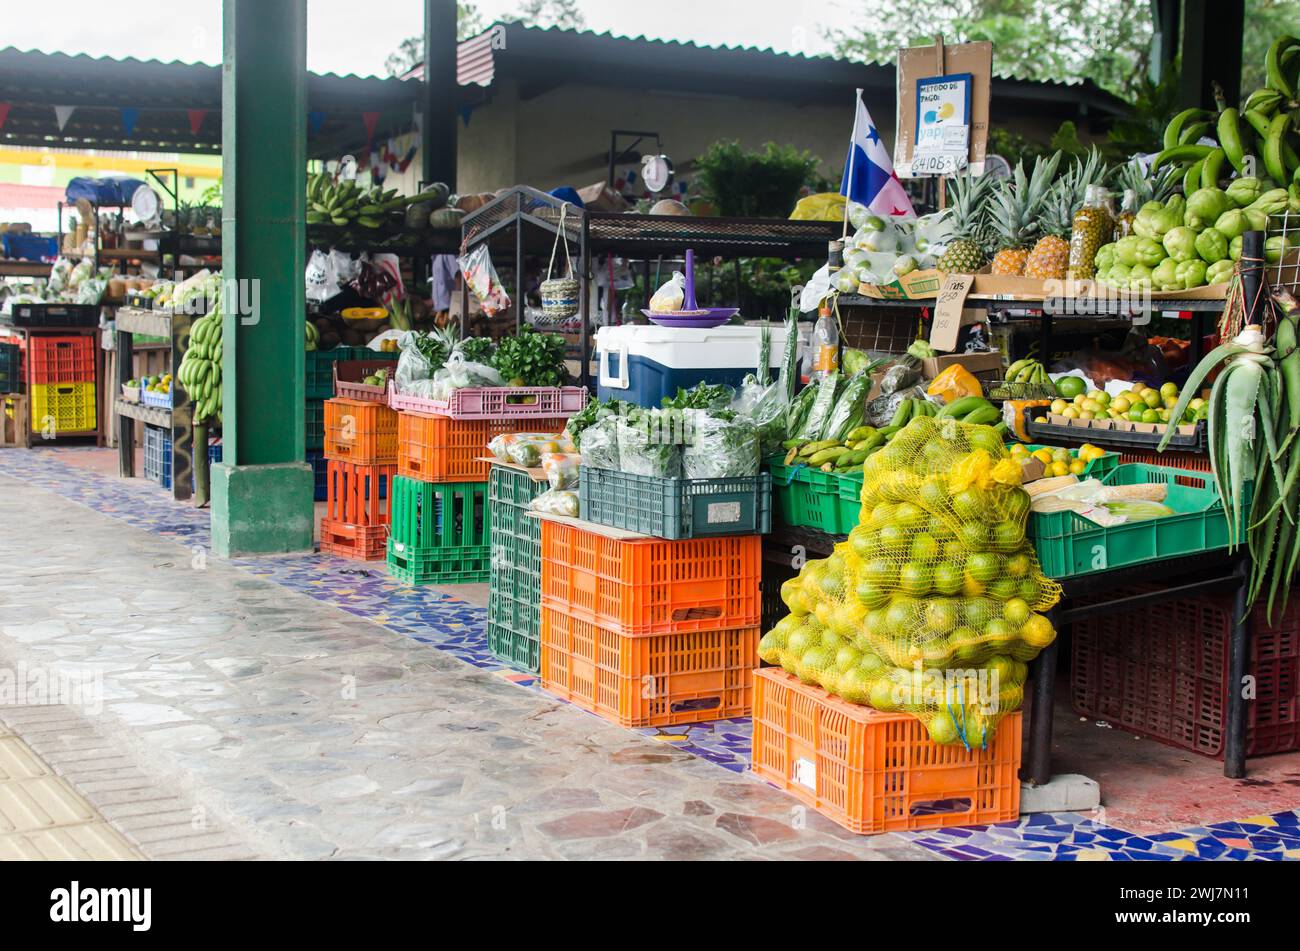 Municipal Market of El Valle de Anton, popular spot offering fresh produce, local crafts, and typical sweets. Stock Photo